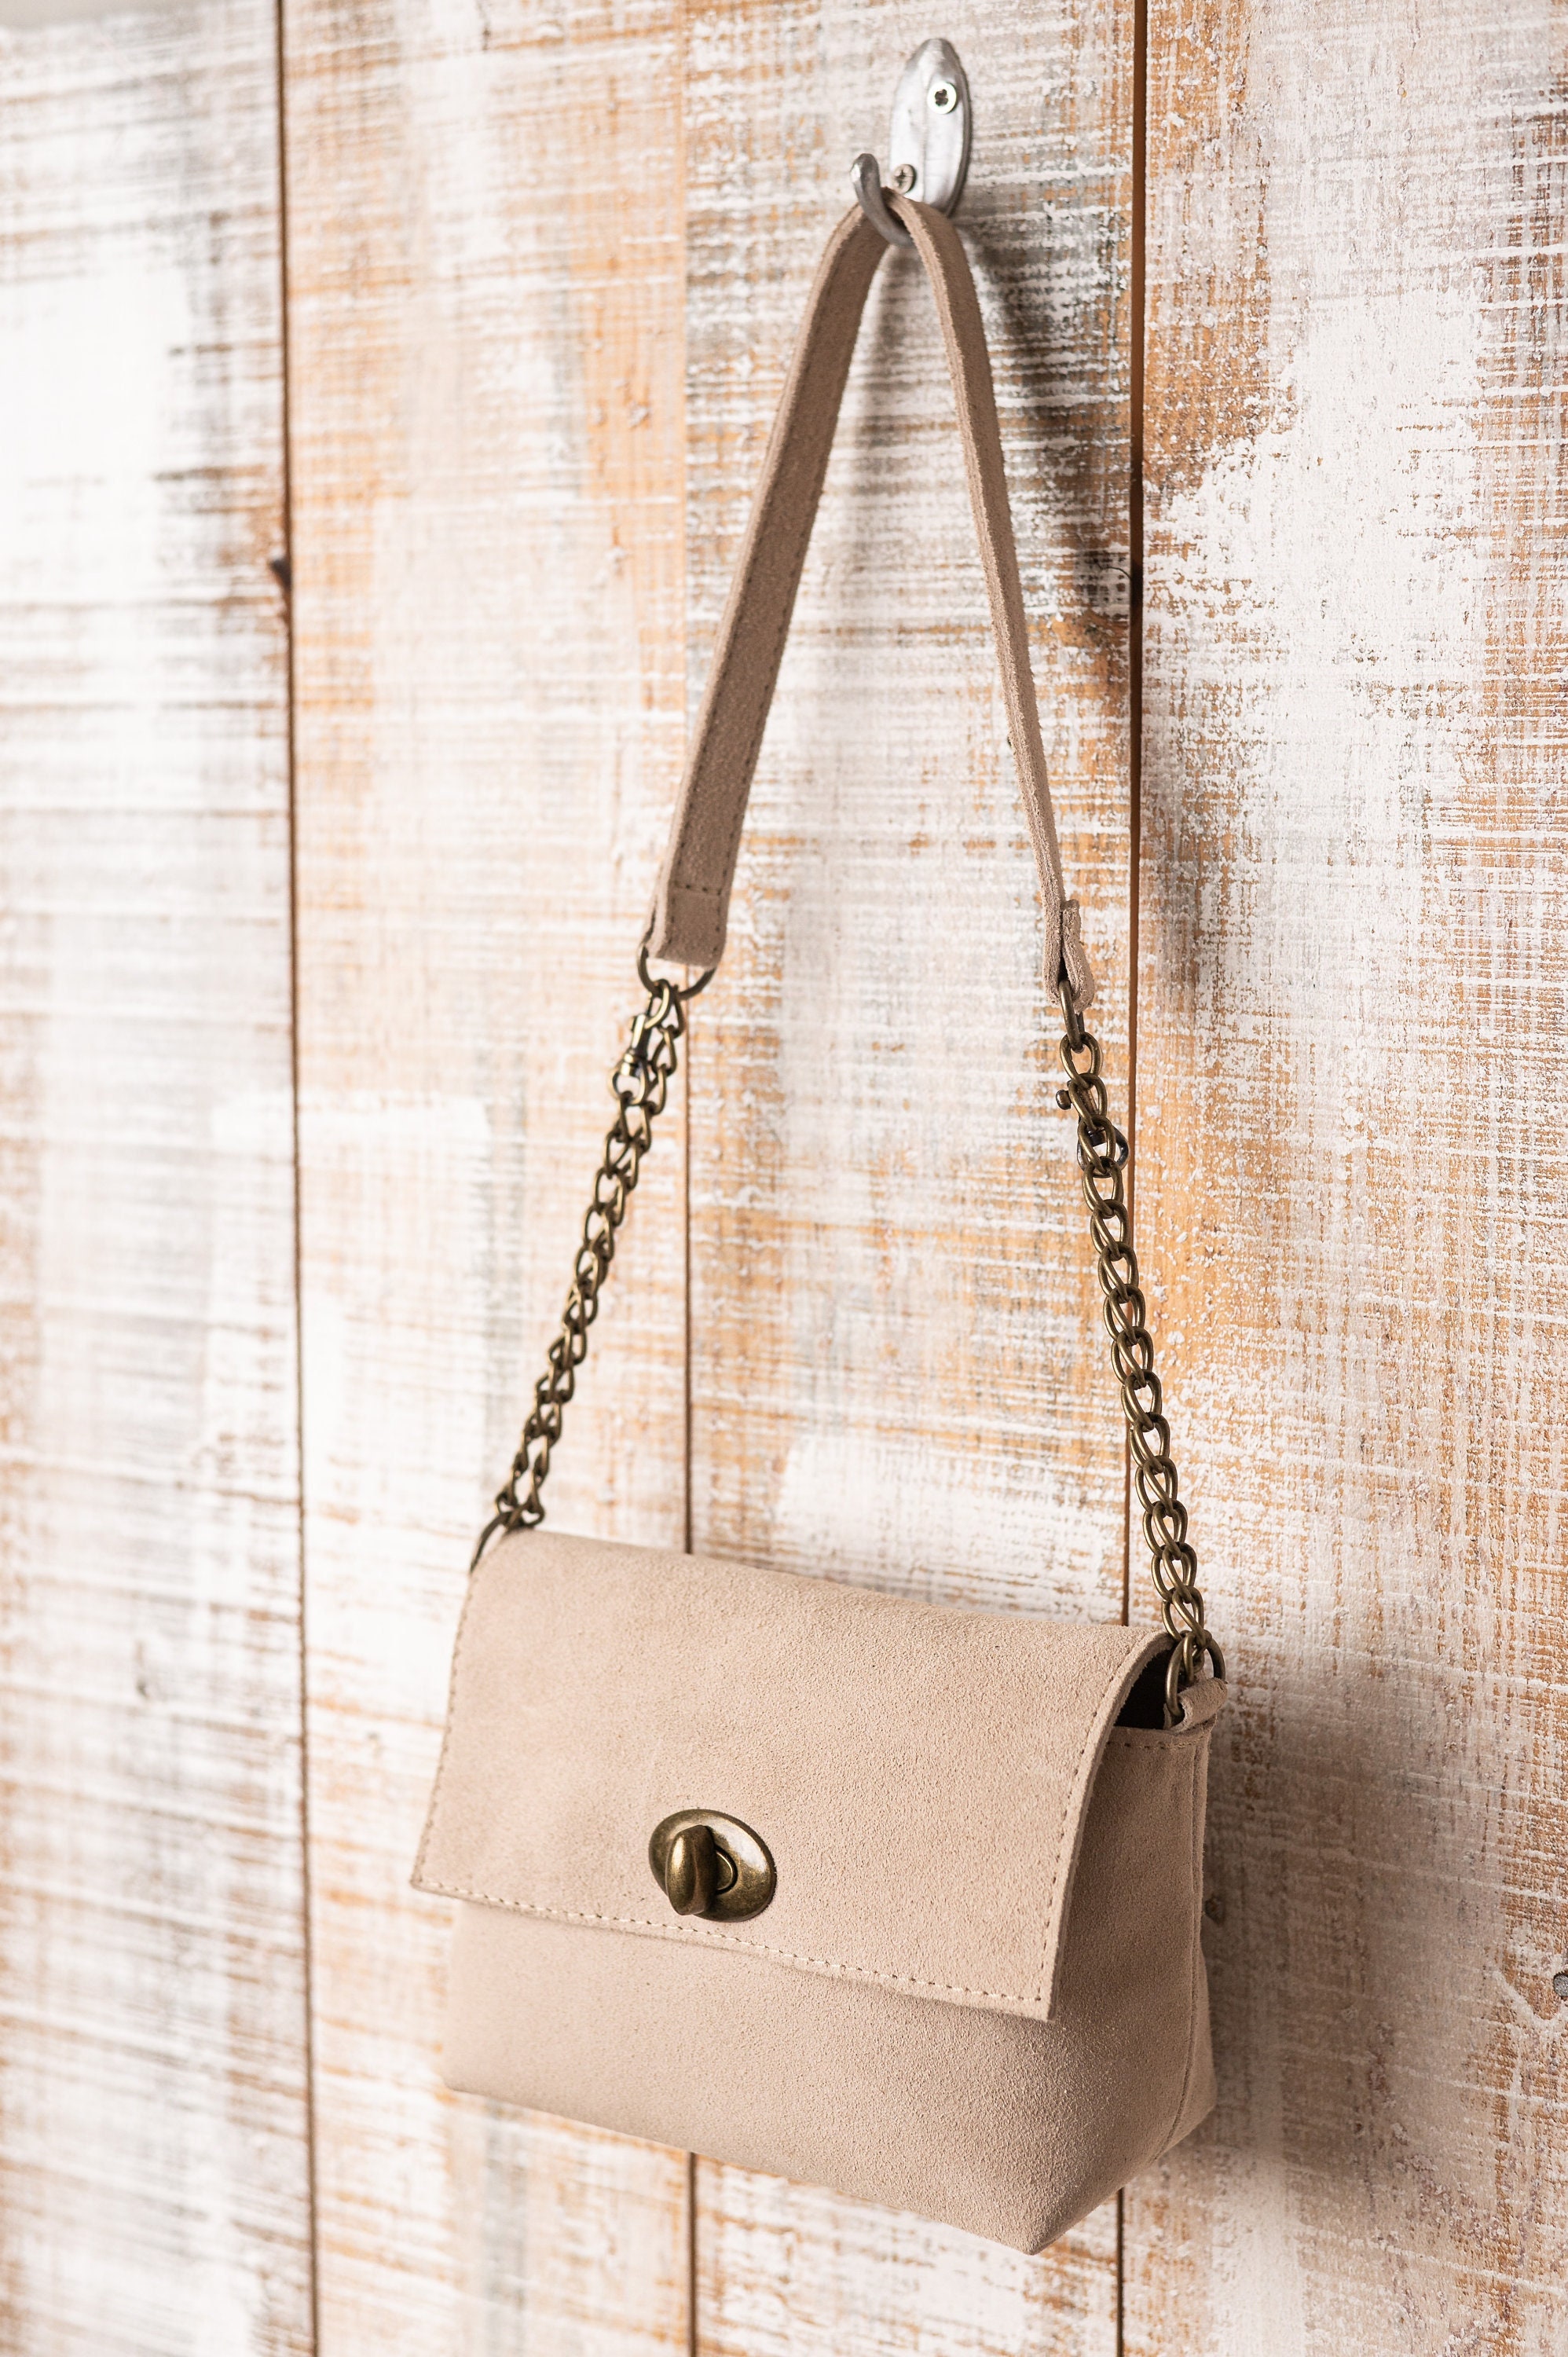 Handmade Silver Leather Bag With the Golden Chain 